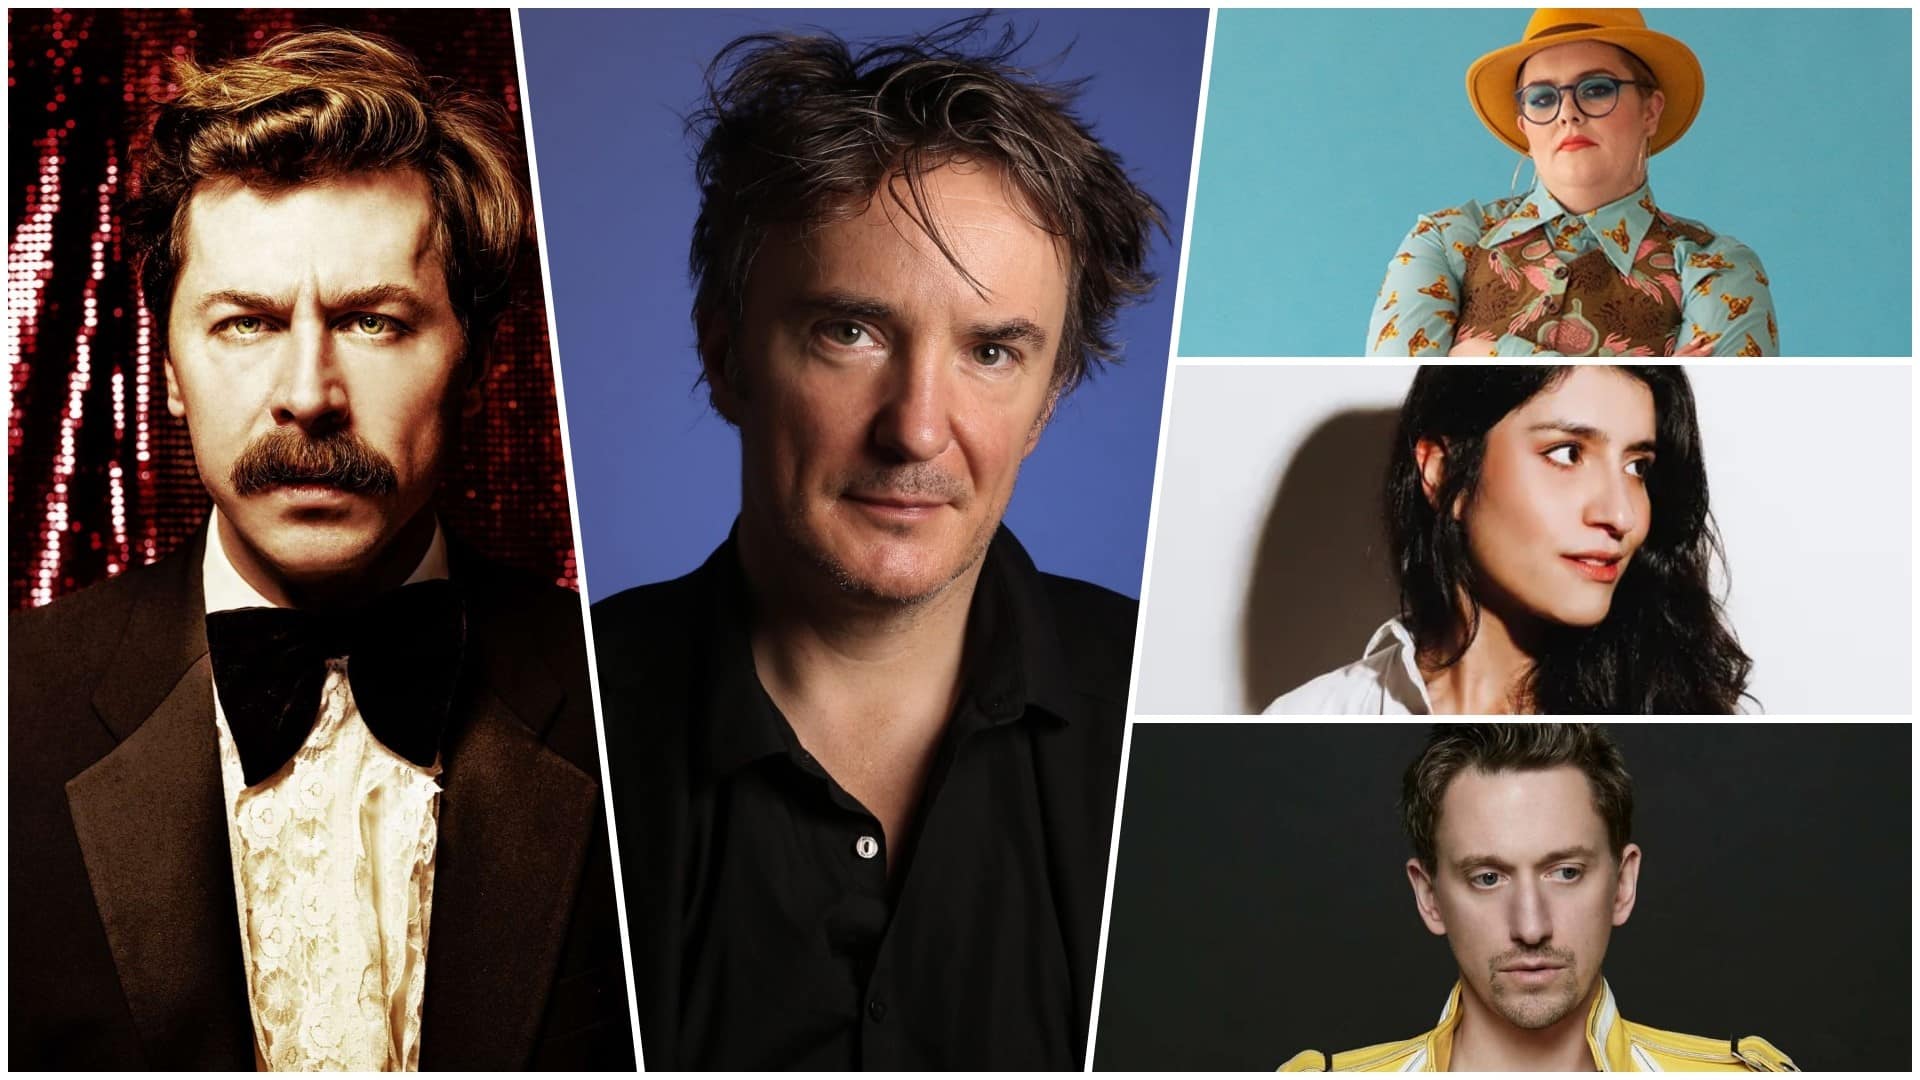 A collage of images including DYLAN MORAN, MIKE WOZNIAK, JAYDE ADAMS, CELYA AB and JOHN ROBINS